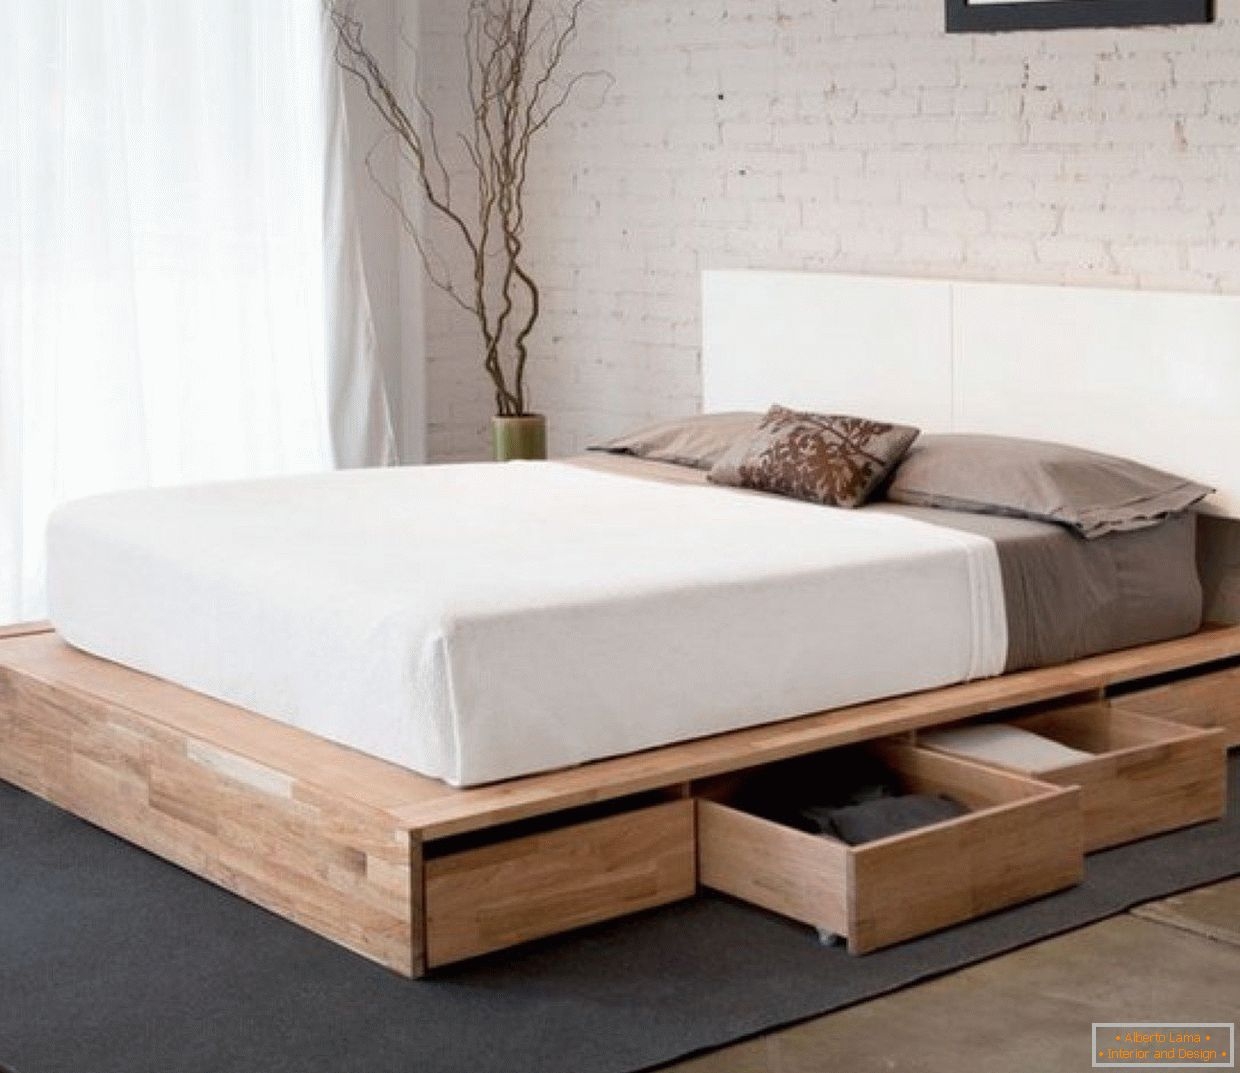 Bed With Drawers Underneath Visualhunt, King Size Bed With Storage Drawers Underneath